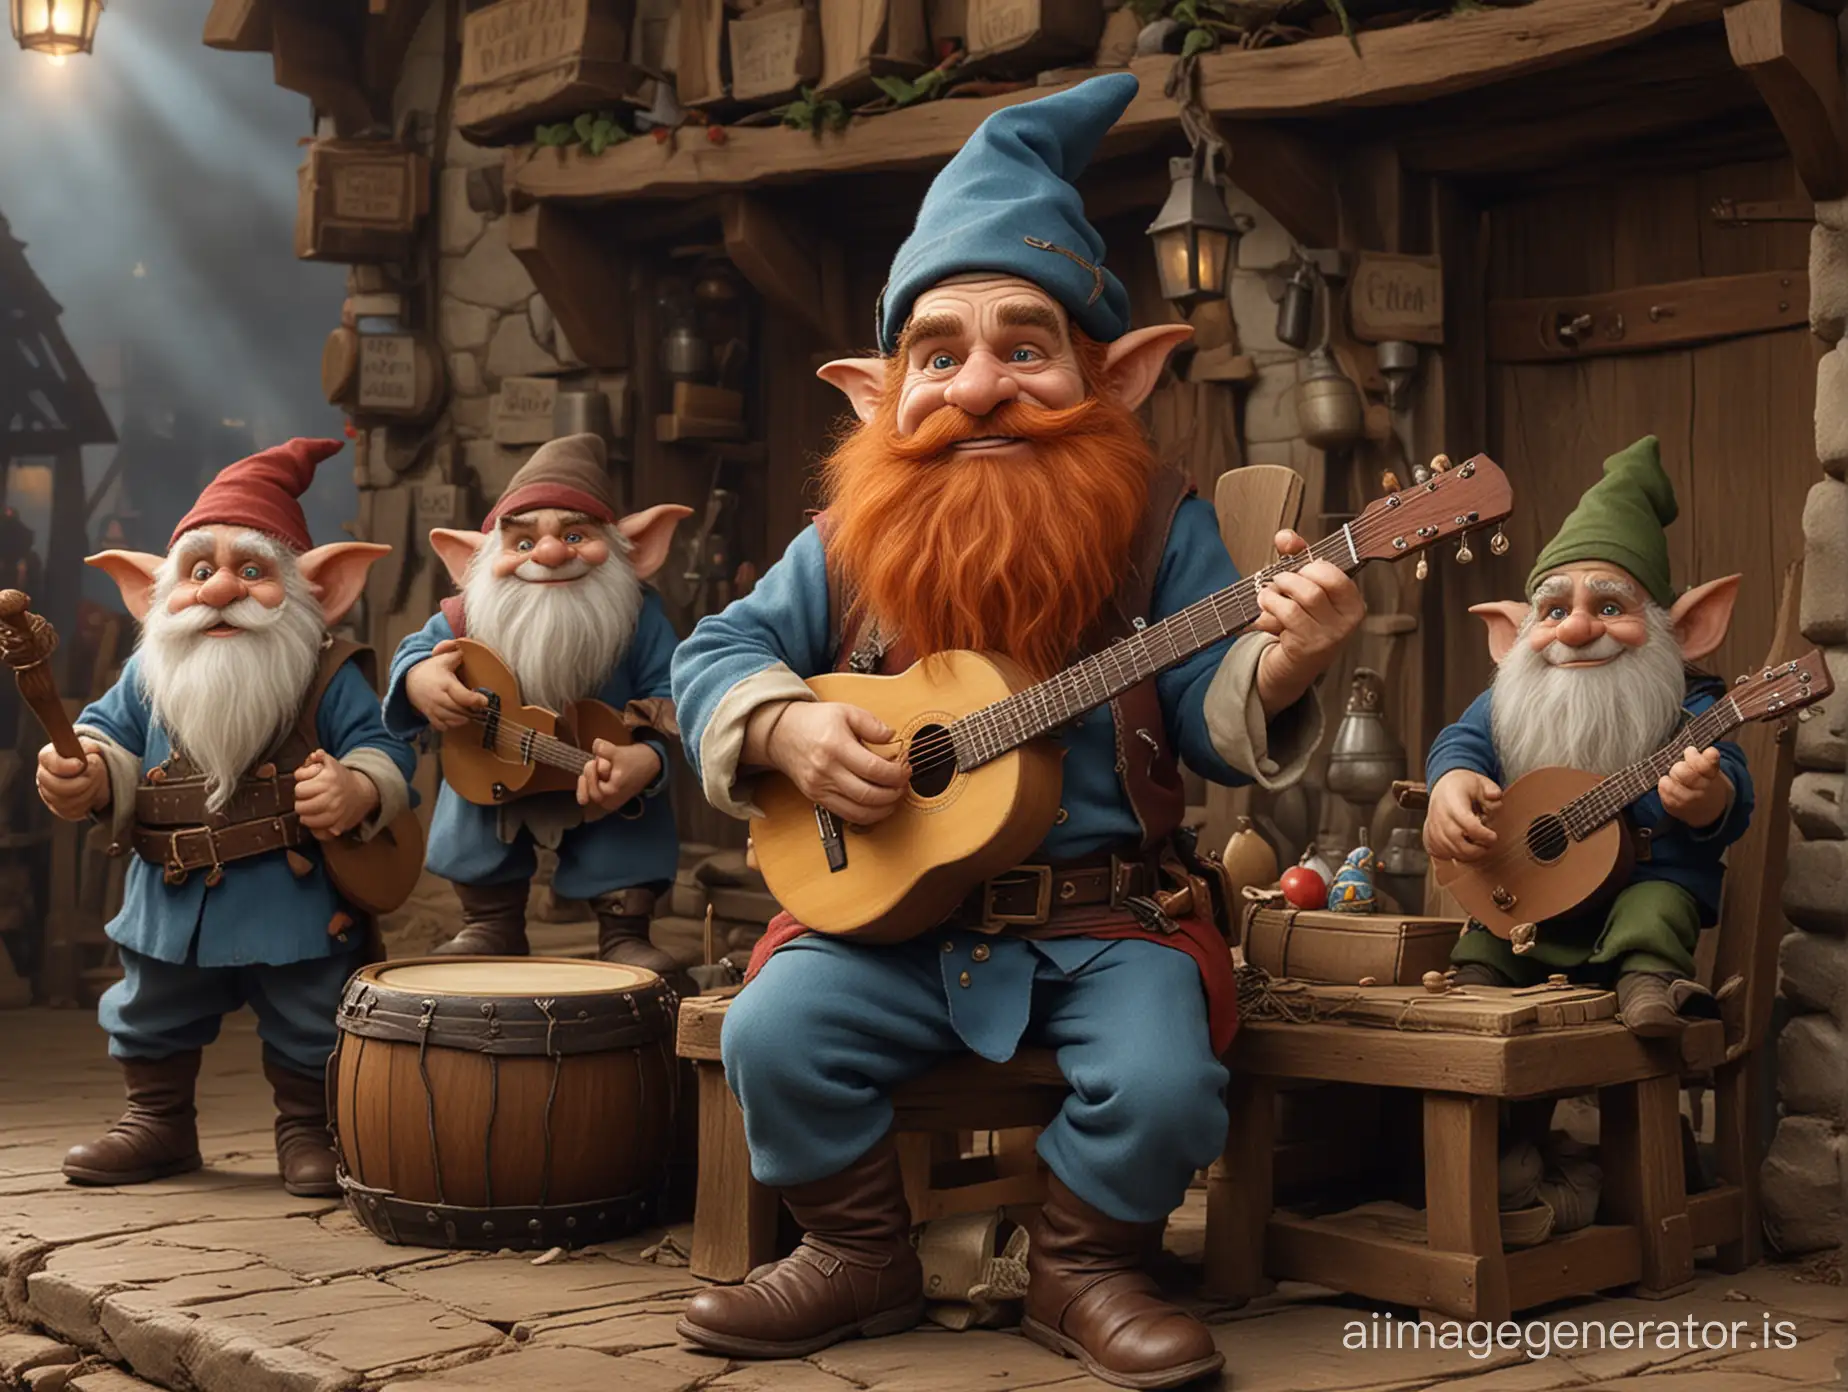 (young Huey Lewis as a dwarf with a long red beard) (a gnome playing a lute dressed in blue) (a goblin playing a keyboard) (a human playing a drum) (bards) on stage in a tavern playing music, fantasy, full body